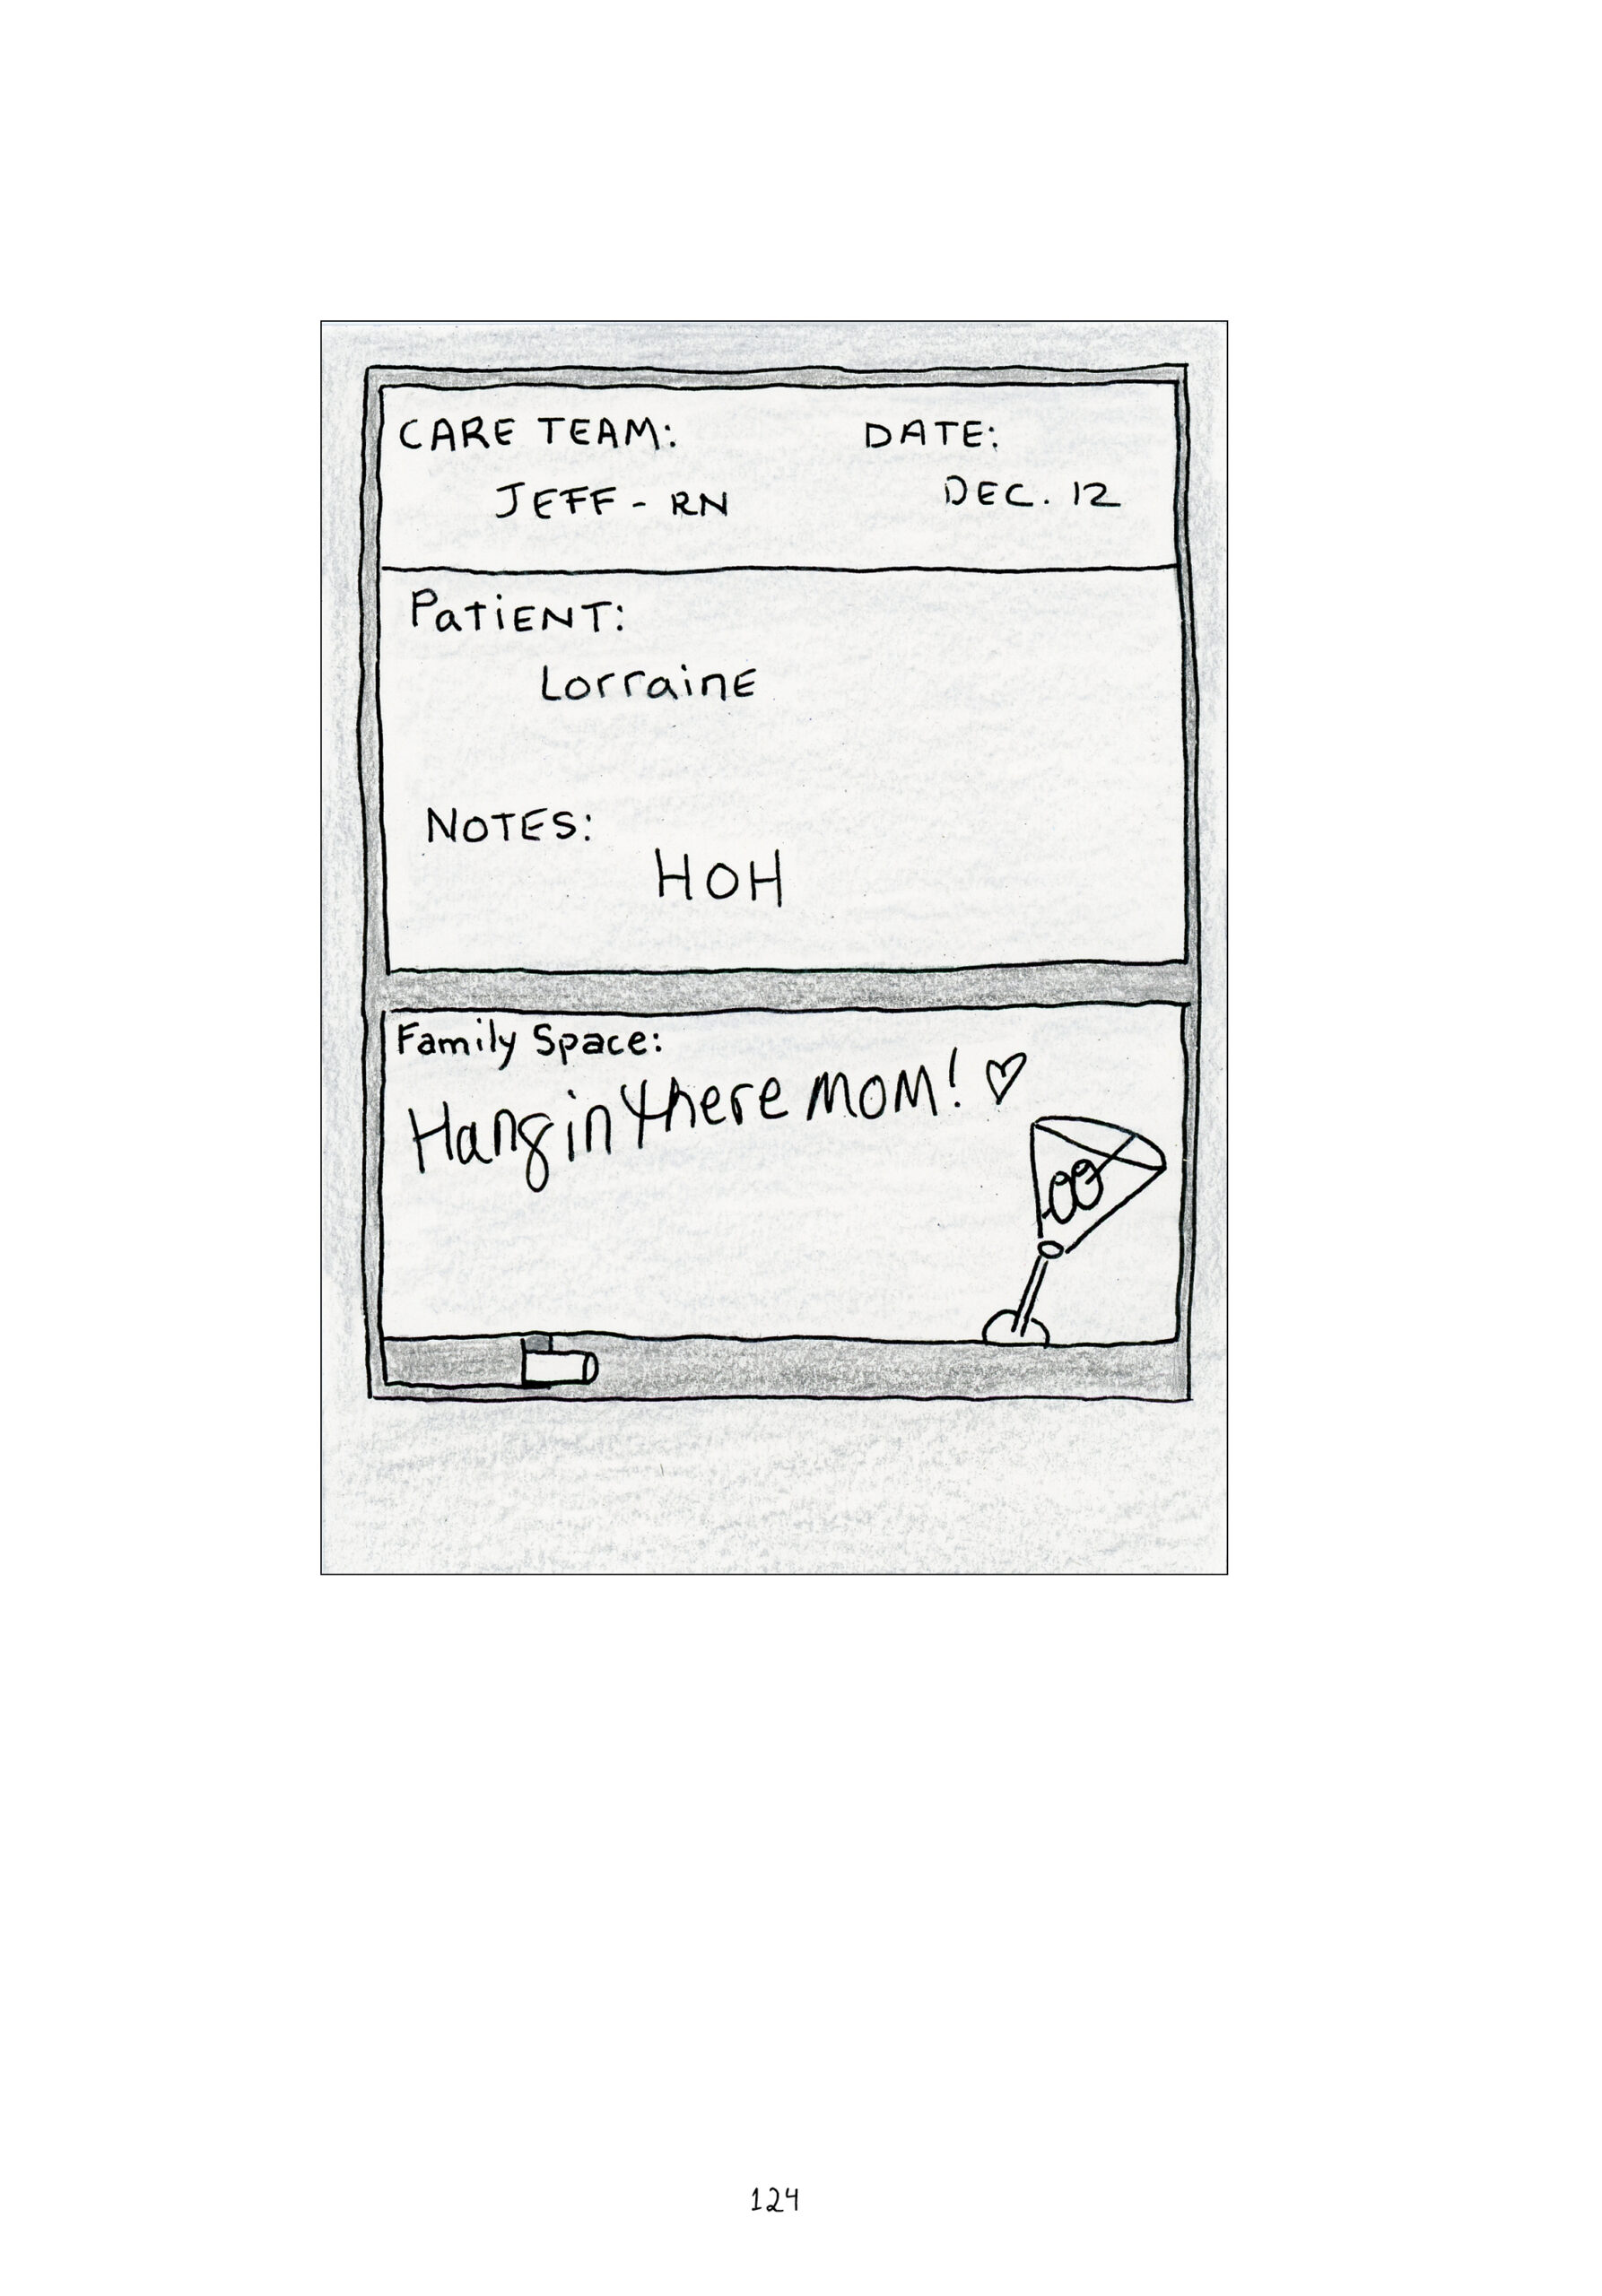 One panel of a white board that does not take up the full page; the rest is a white background. The board reads, “Care team: Jeff - RN. Date: Dec 12. Patient: Lorraine. Notes: HOH. Family space: Hang in there, Mom! (heart)”